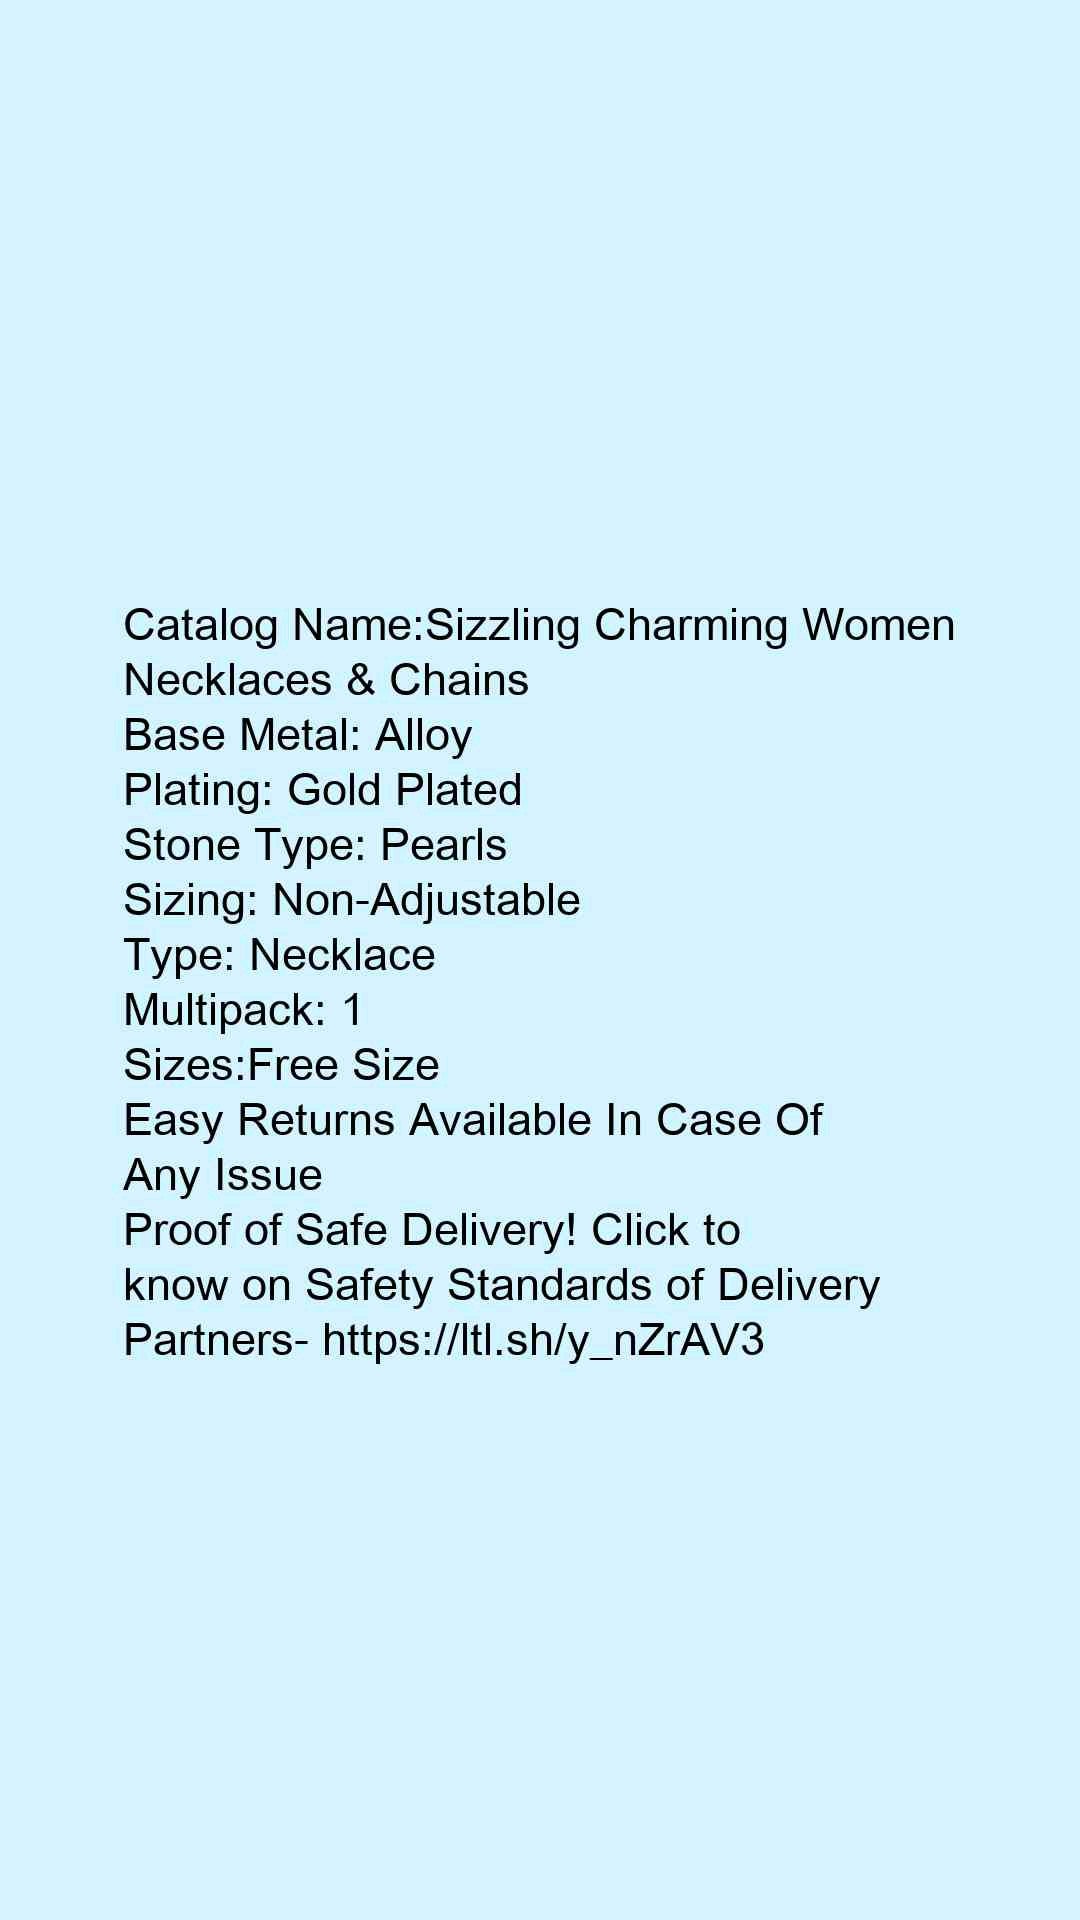 Sizzling Charming Women Necklaces & Chains - Faritha